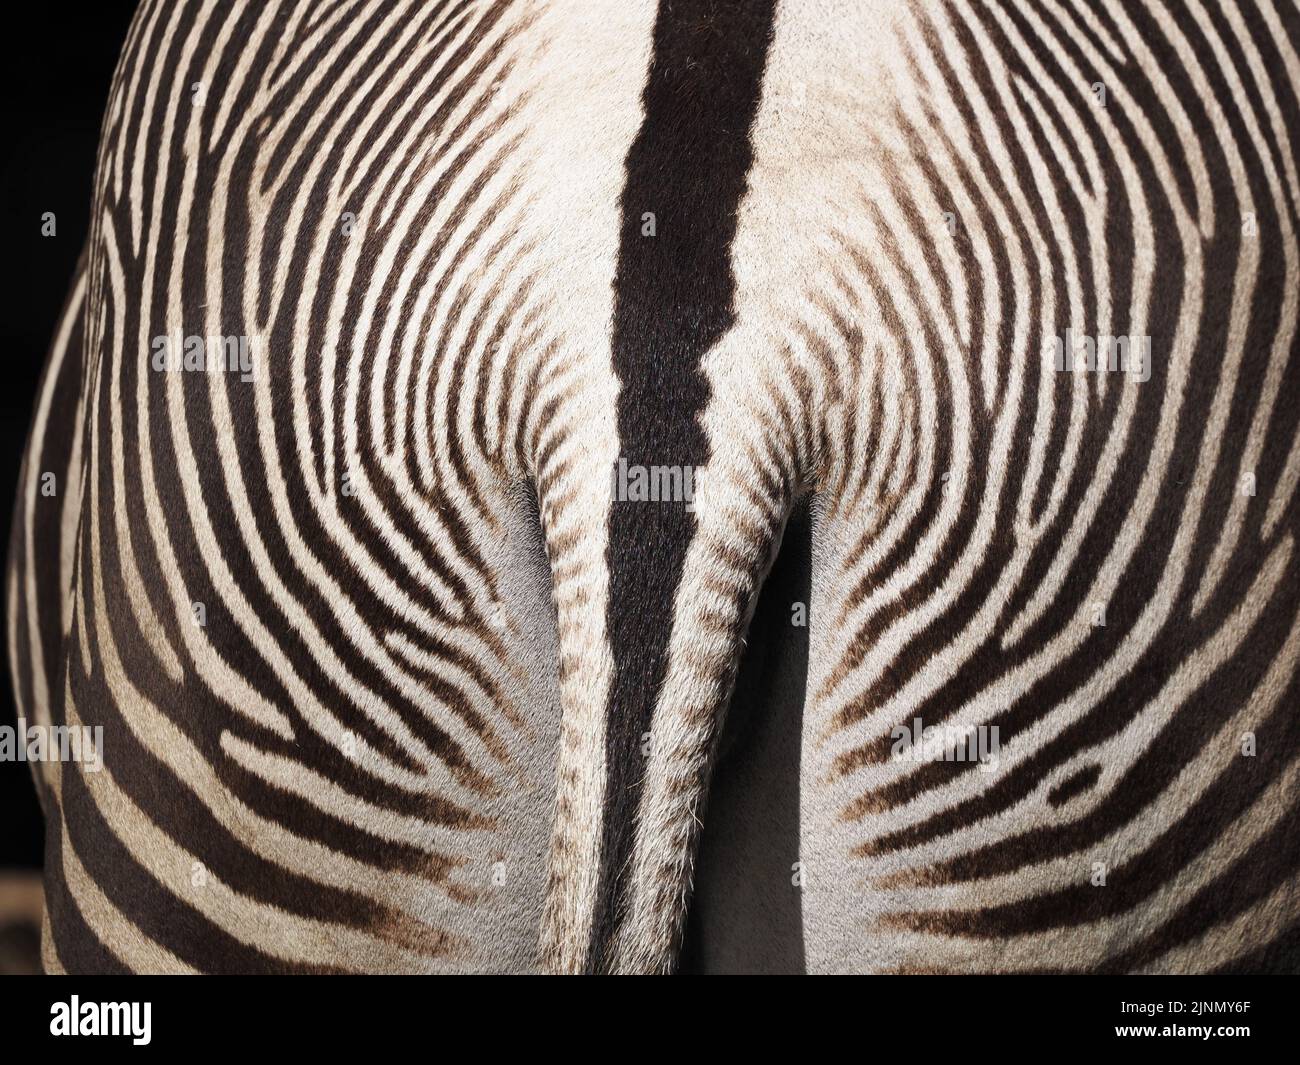 Zebra photographed from behind at the Salzburg Zoo Stock Photo